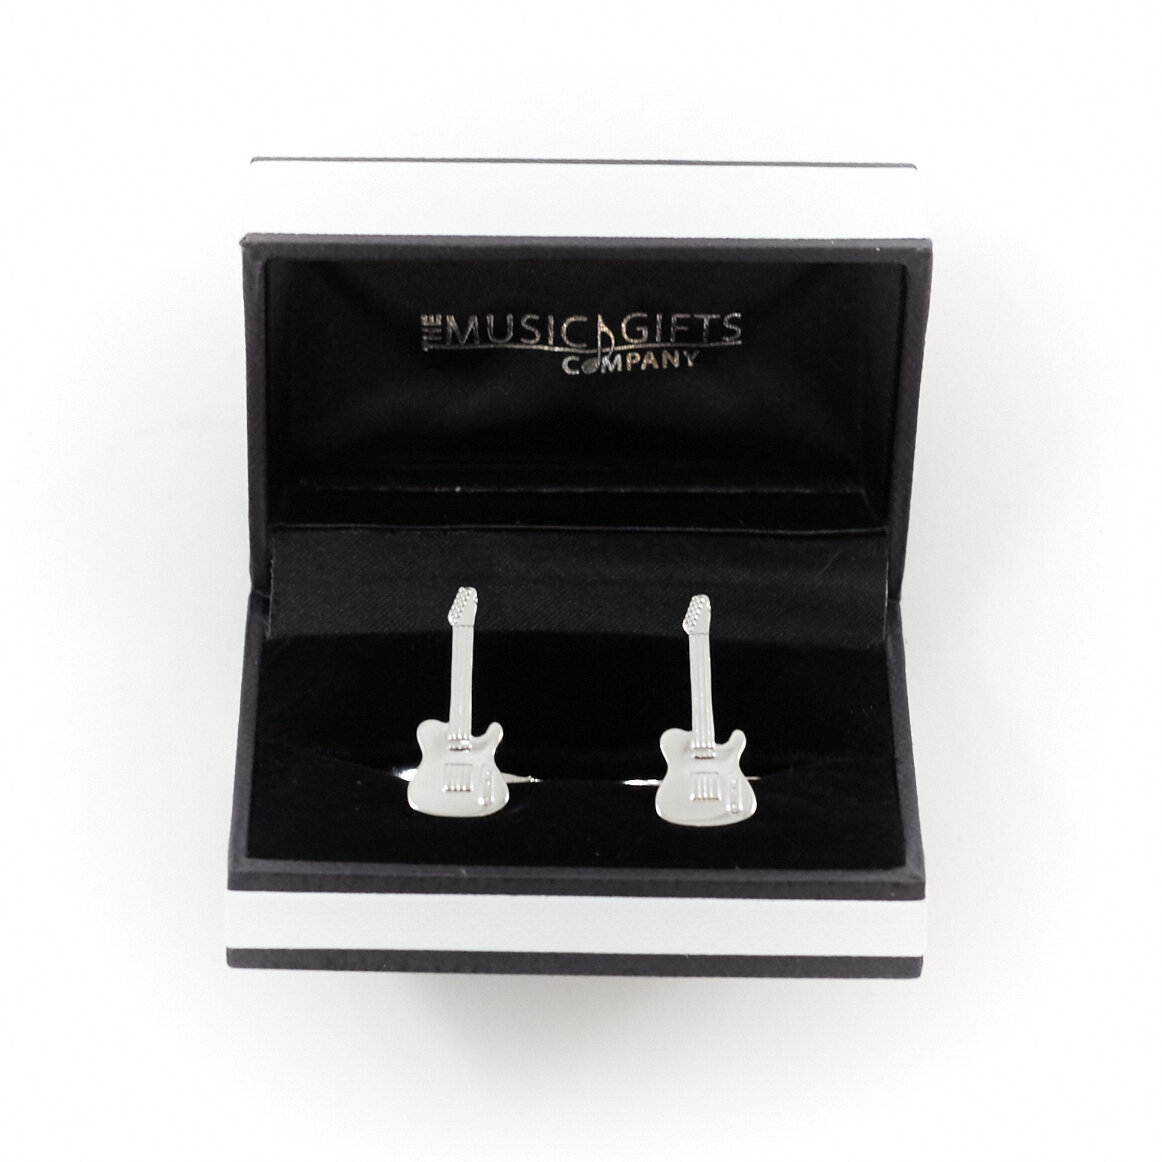 Music Gifts Company CUF12 Cufflinks, Telecaster Guitar : photo 1